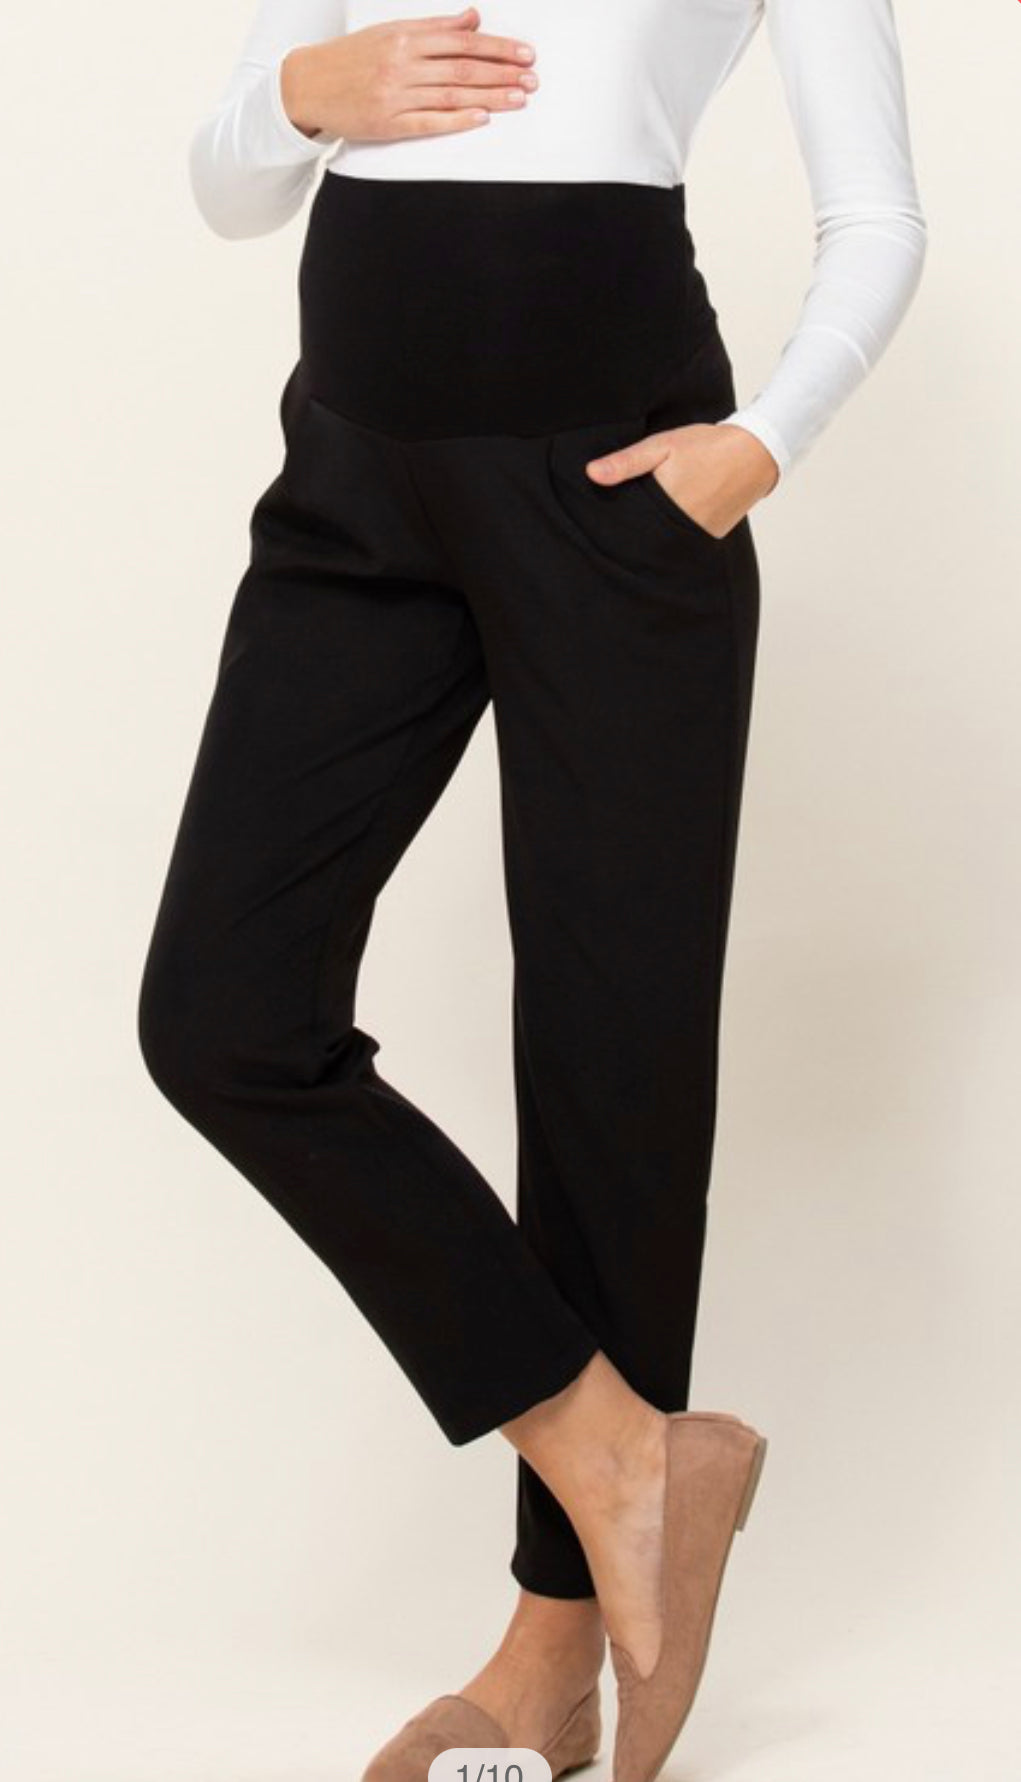 Maternity Oh Mamma Skinny Pant with Demi Panel Available in Plus Sizes   Walmartcom